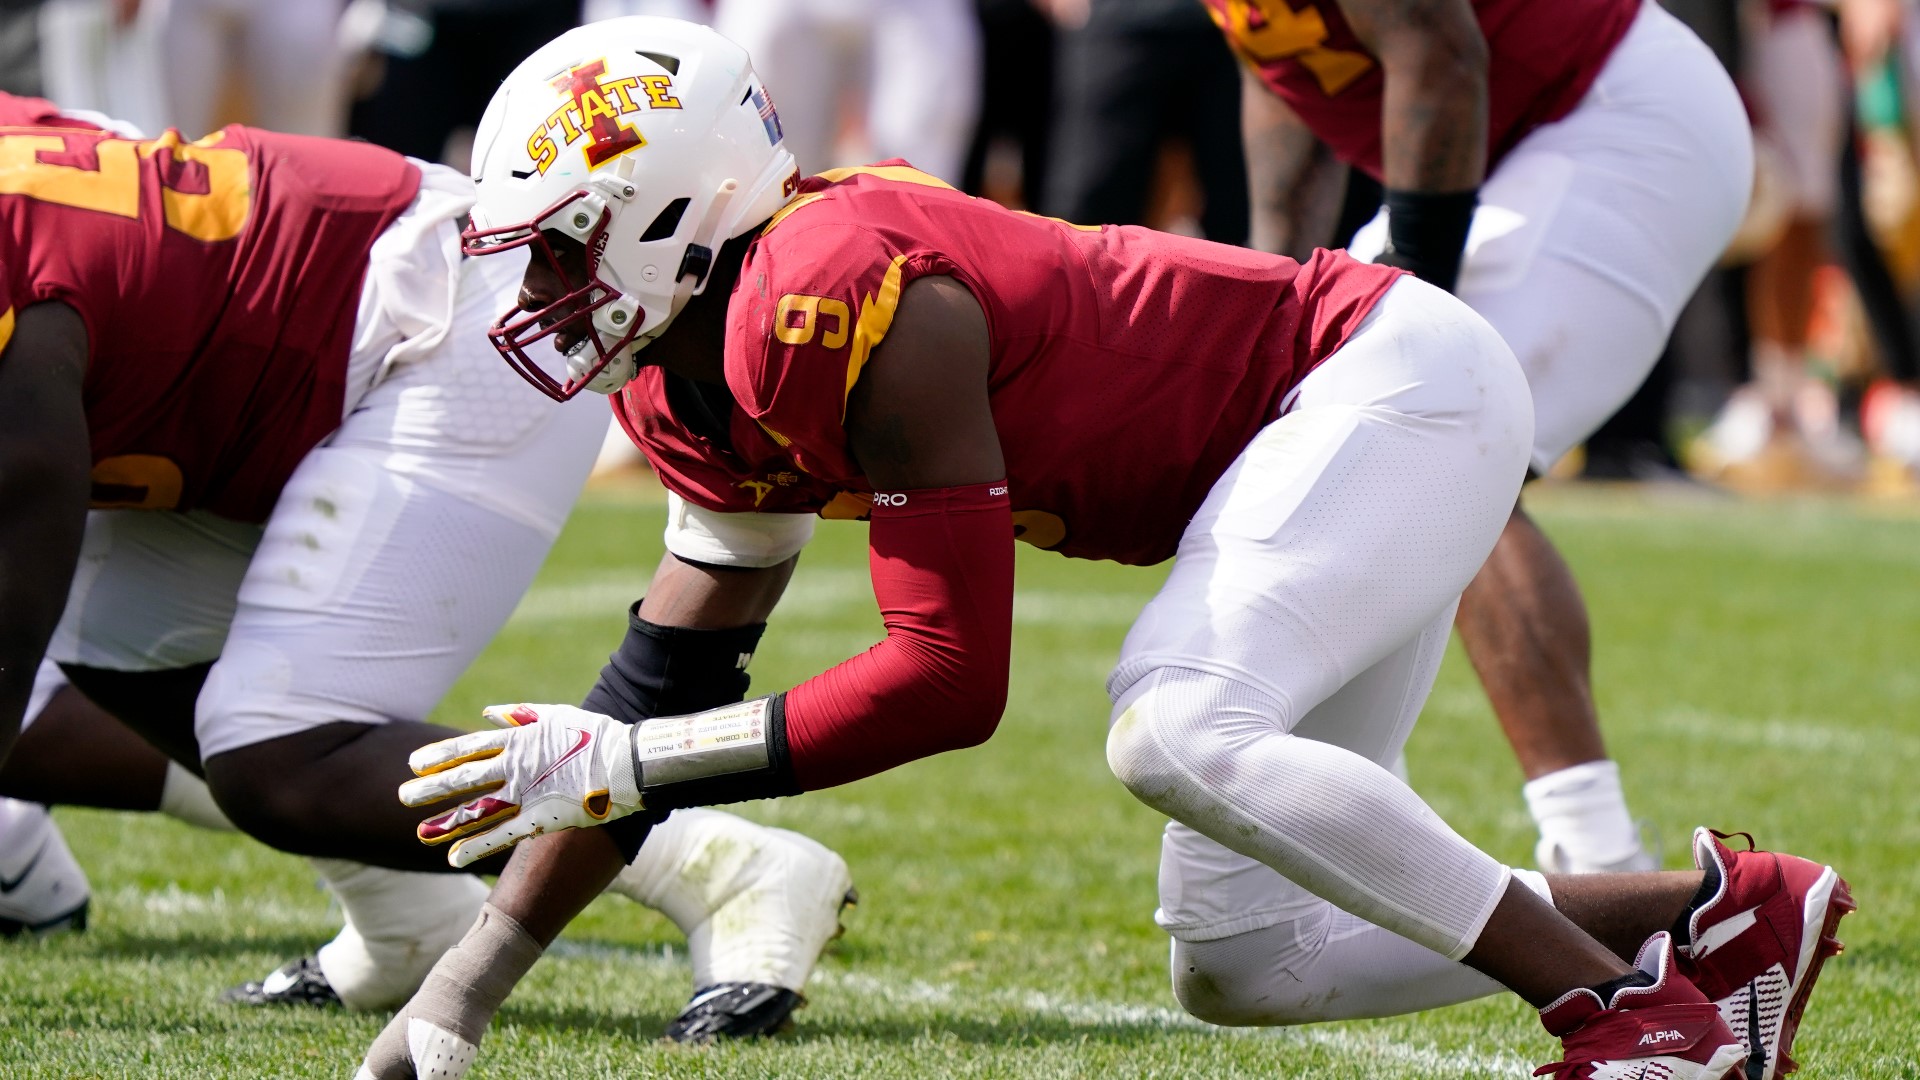 At 6'4" and 240 pounds, Will McDonald IV left Iowa State as the school's all-time sack leader and tied for the all-time Big 12 record.